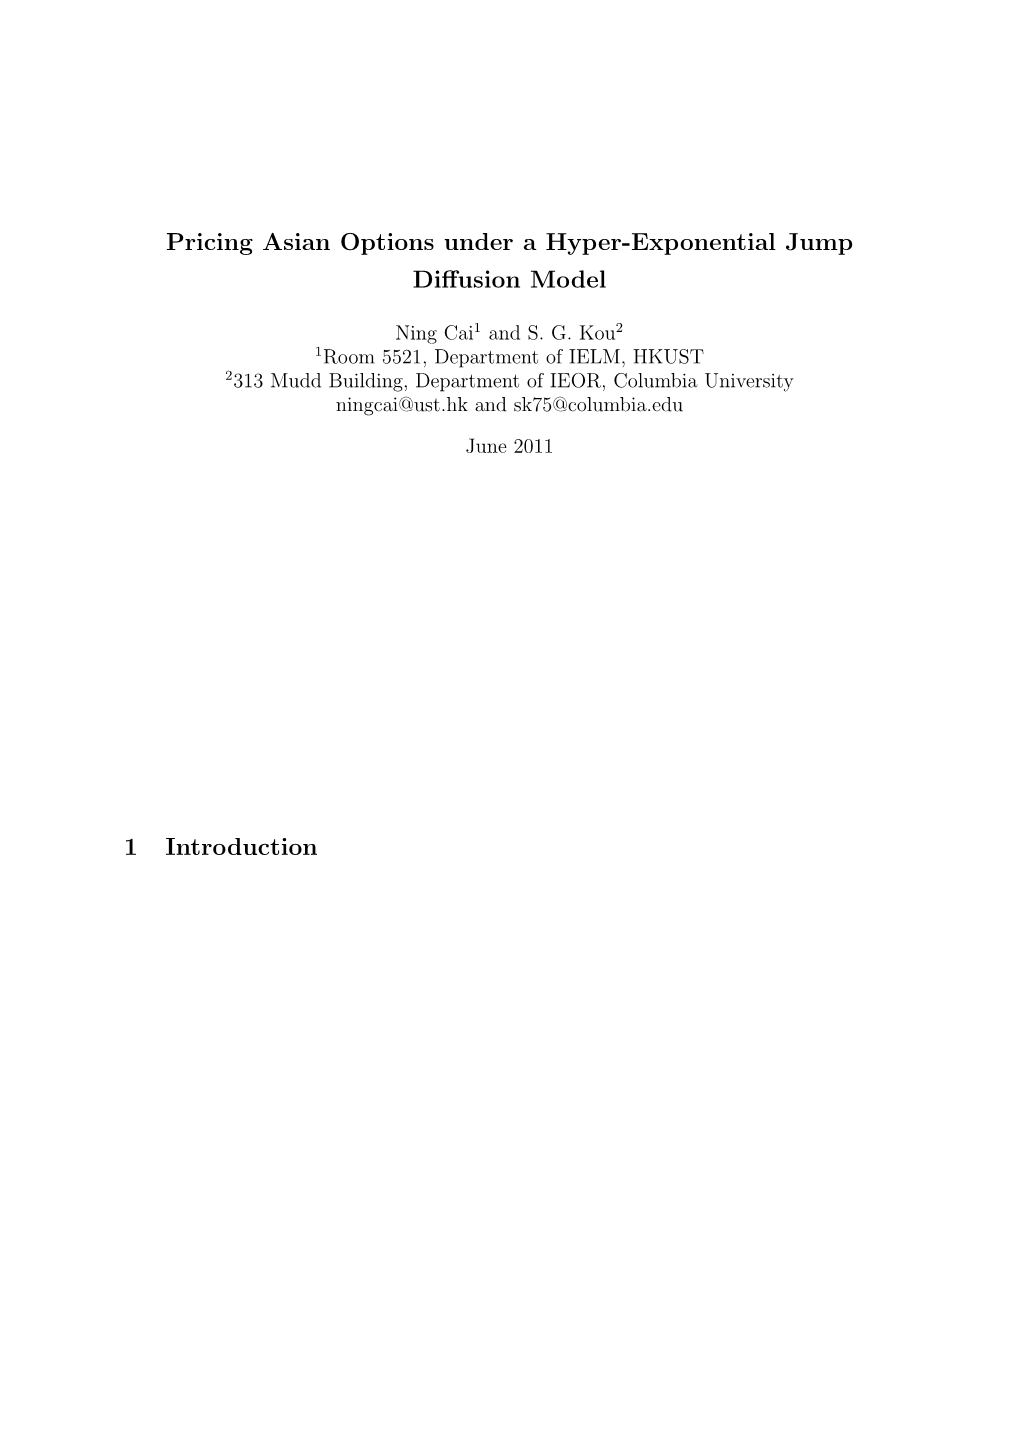 Pricing Asian Options Under a Hyper-Exponential Jump Diffusion Model 1 Introduction